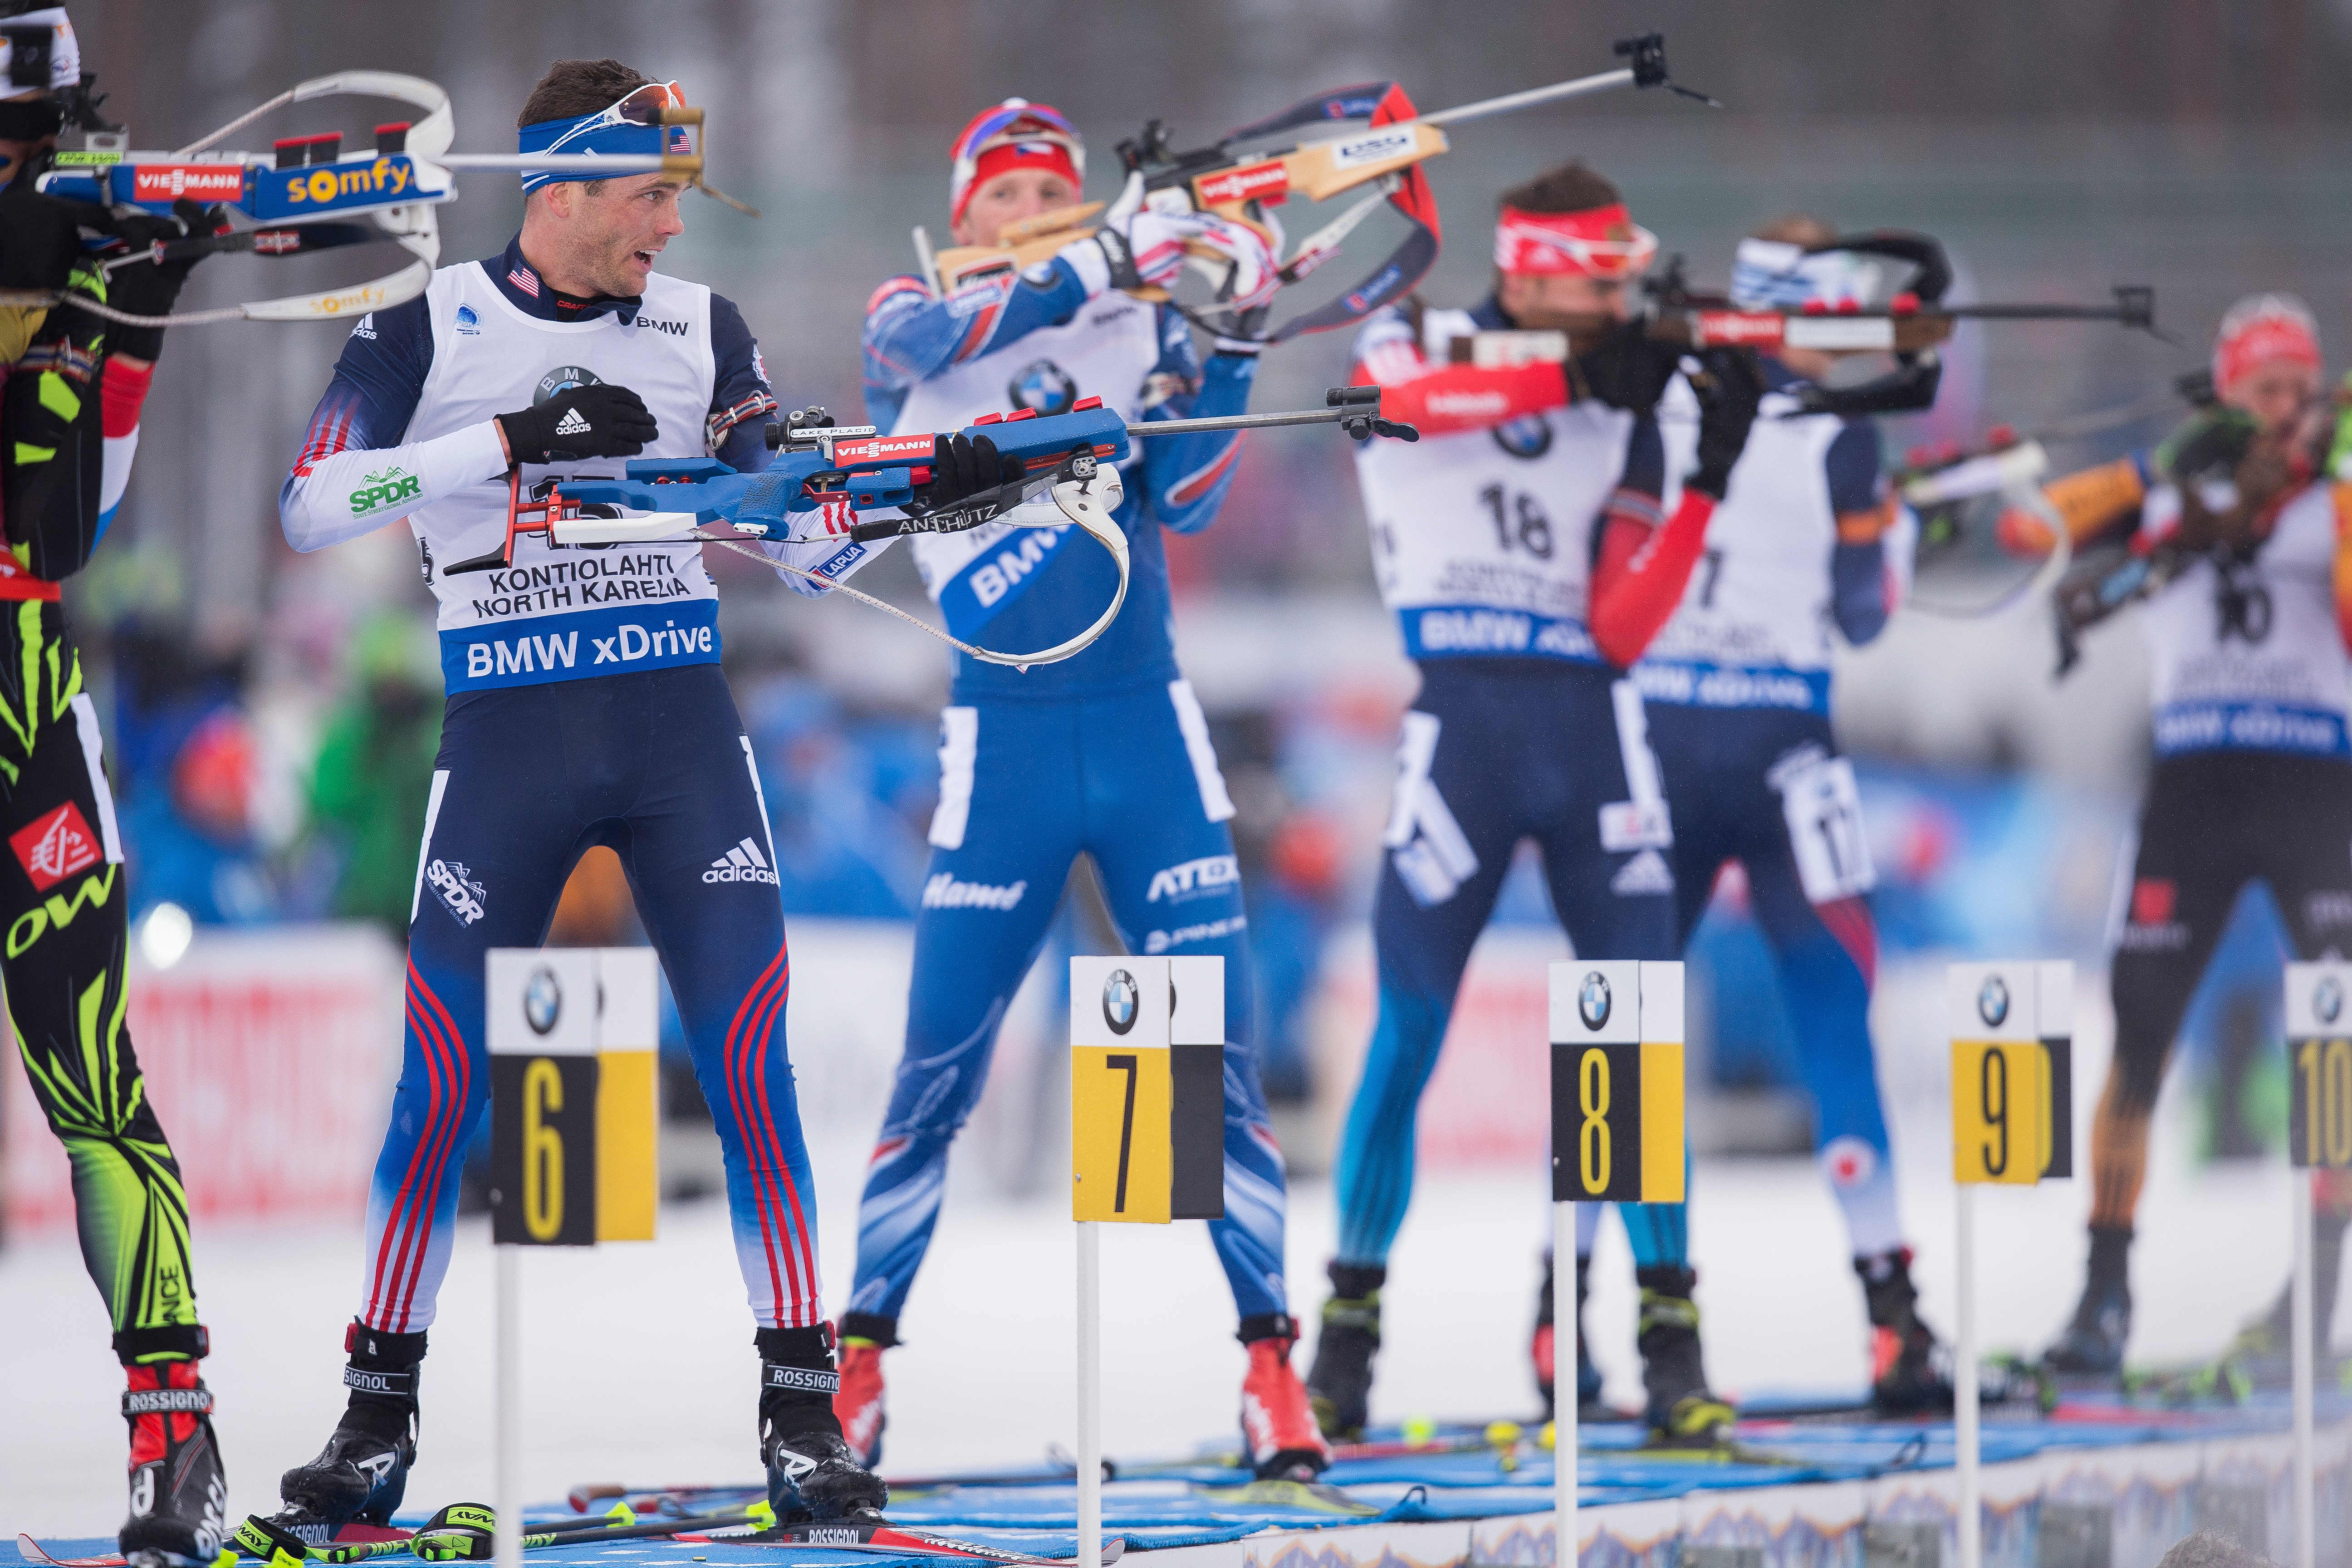 Lesser Finds Perfection in IBU World Champs Pursuit; Smith Leads North Americans in 13th